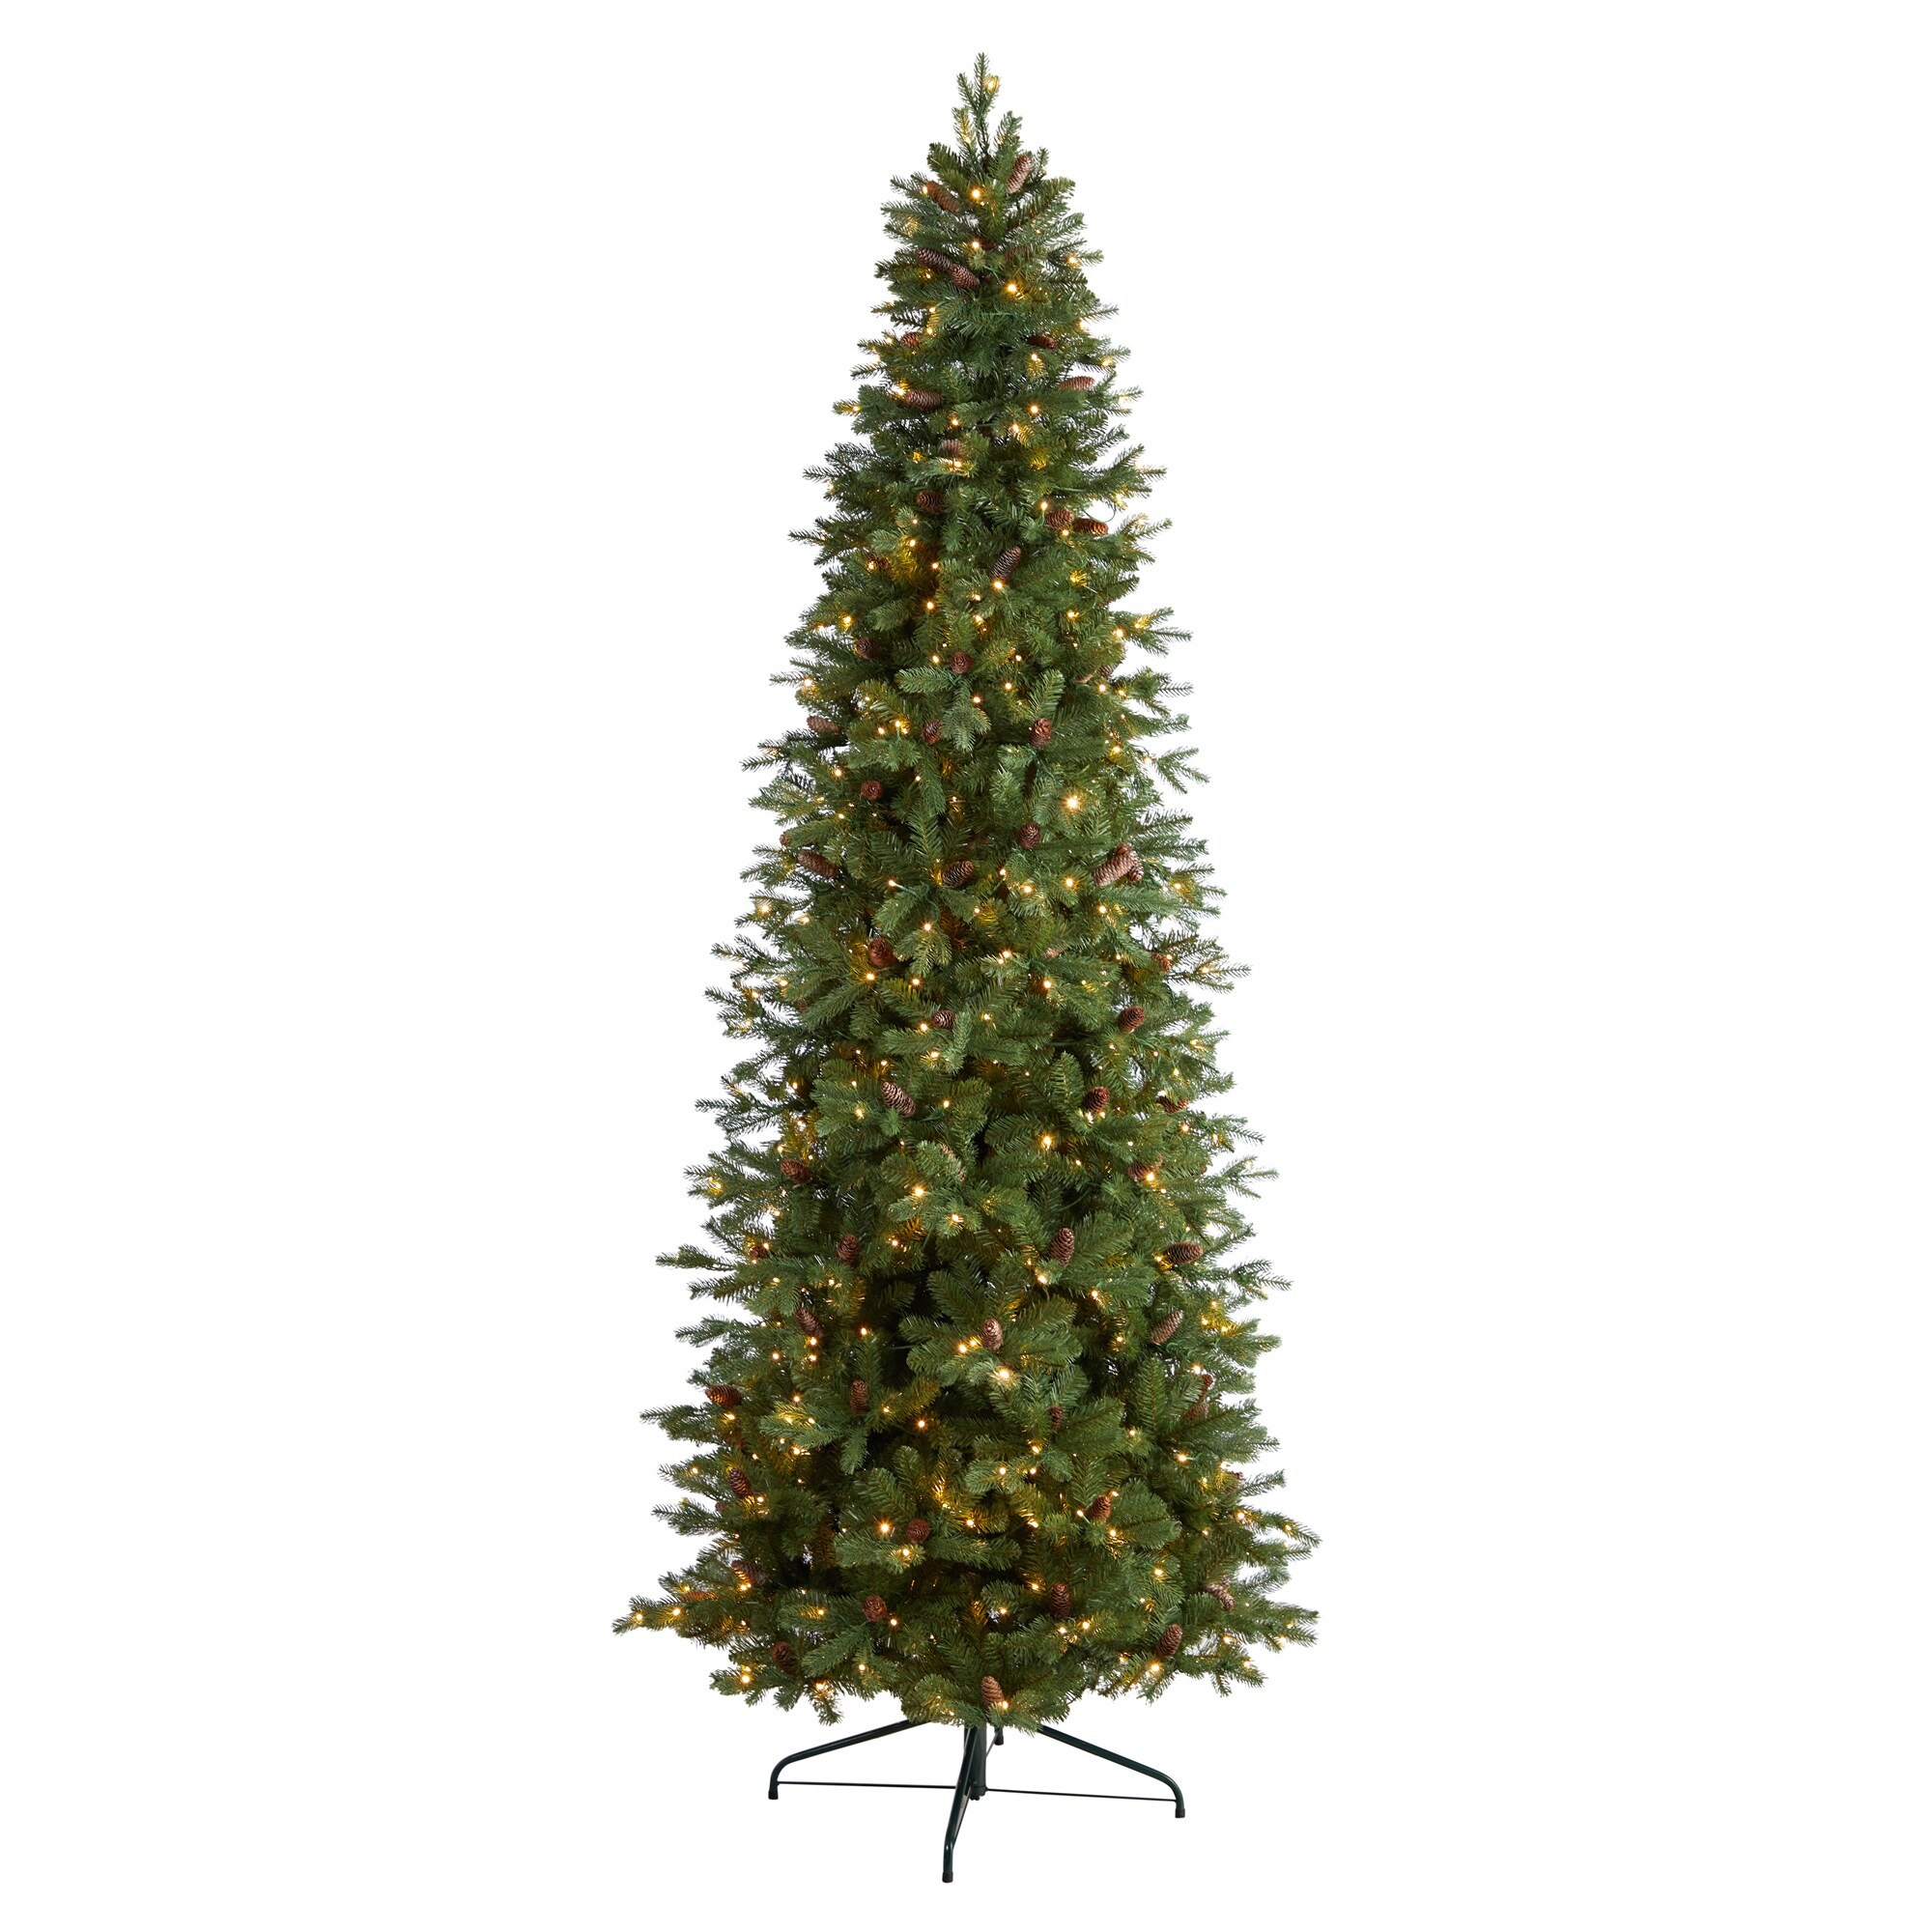 Outdoor Christmas Tree 10FT Artificial Xmas Decor Indoor W Stand Holiday Green 